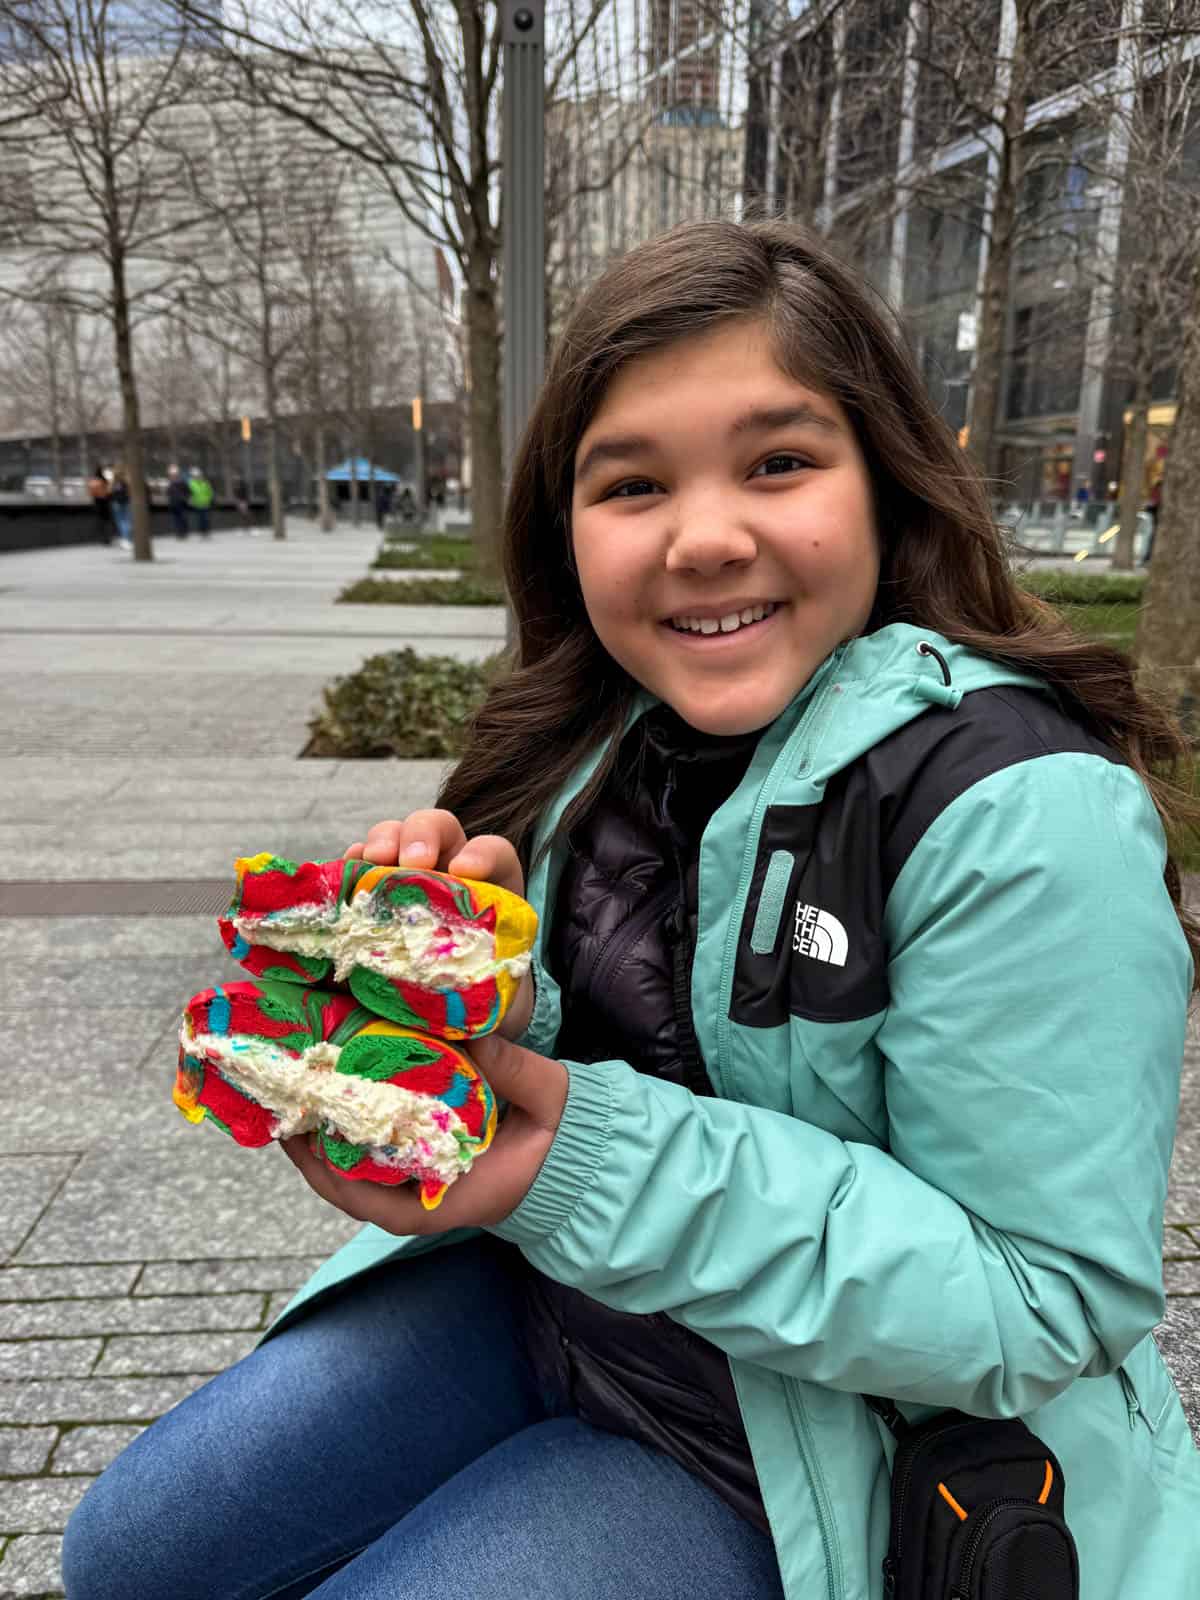 A girl holding a rainbow bagel with birthday cake cream cheese.